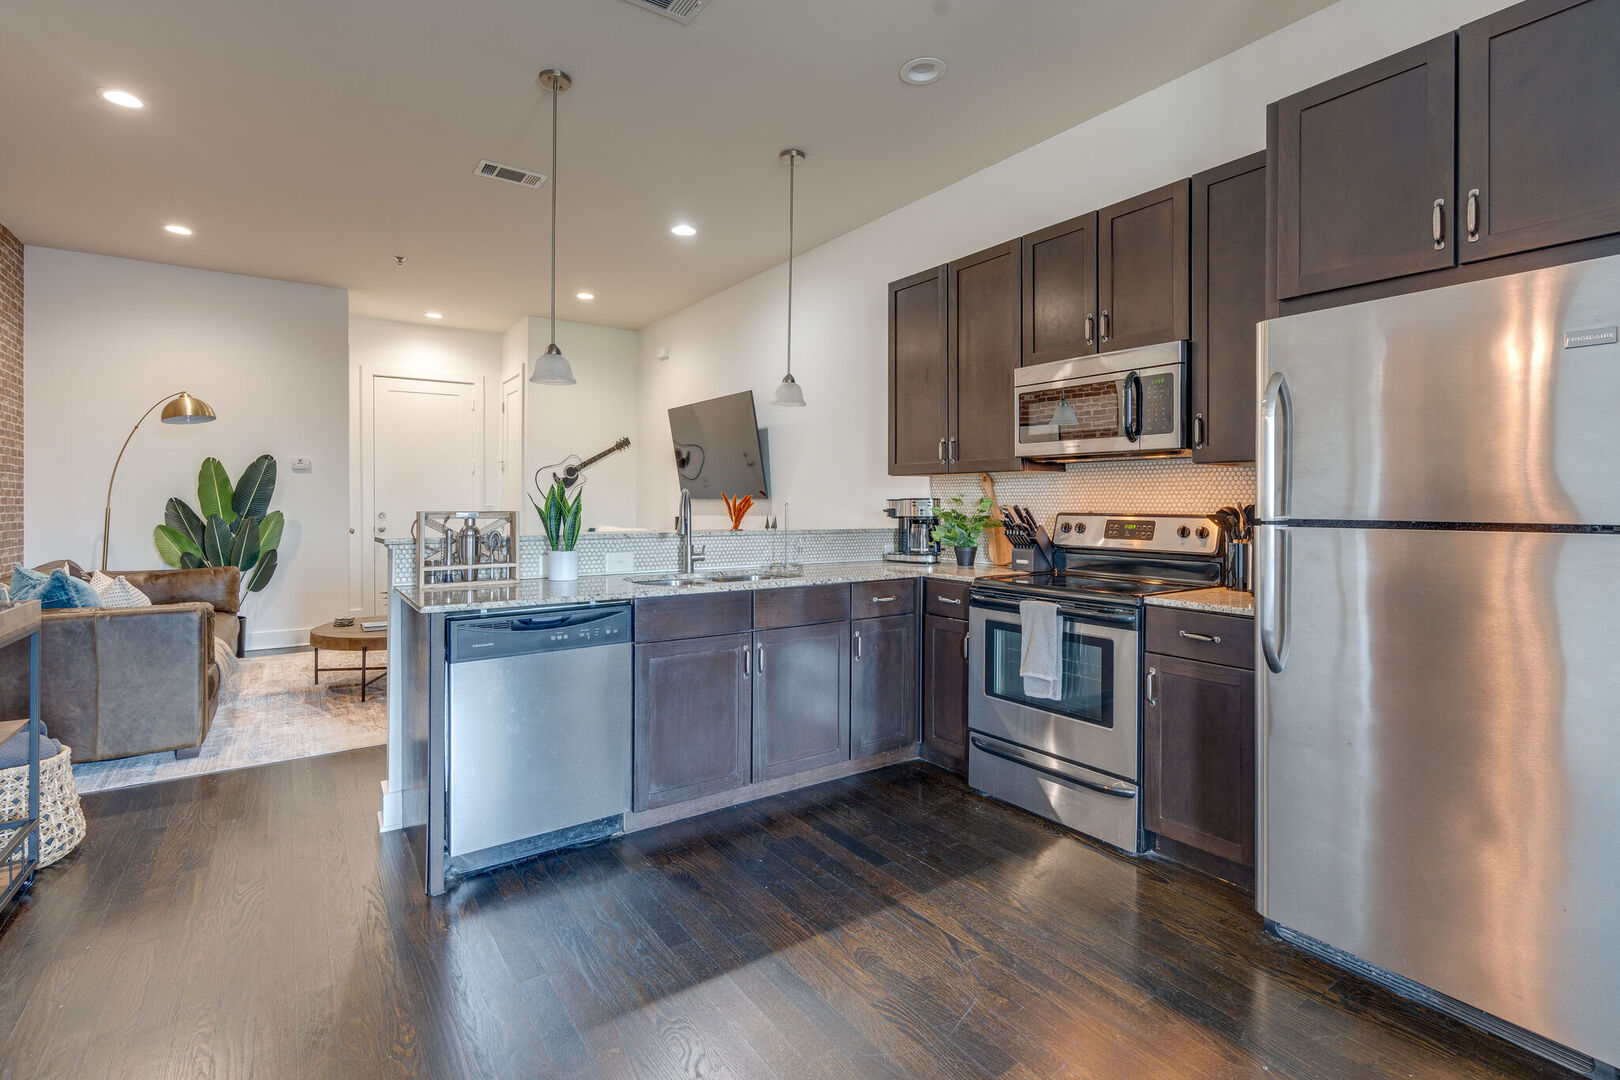 Unit 4: Fully stocked kitchen with basic cooking essentials, stainless steel appliances, granite countertops and breakfast bar seating.